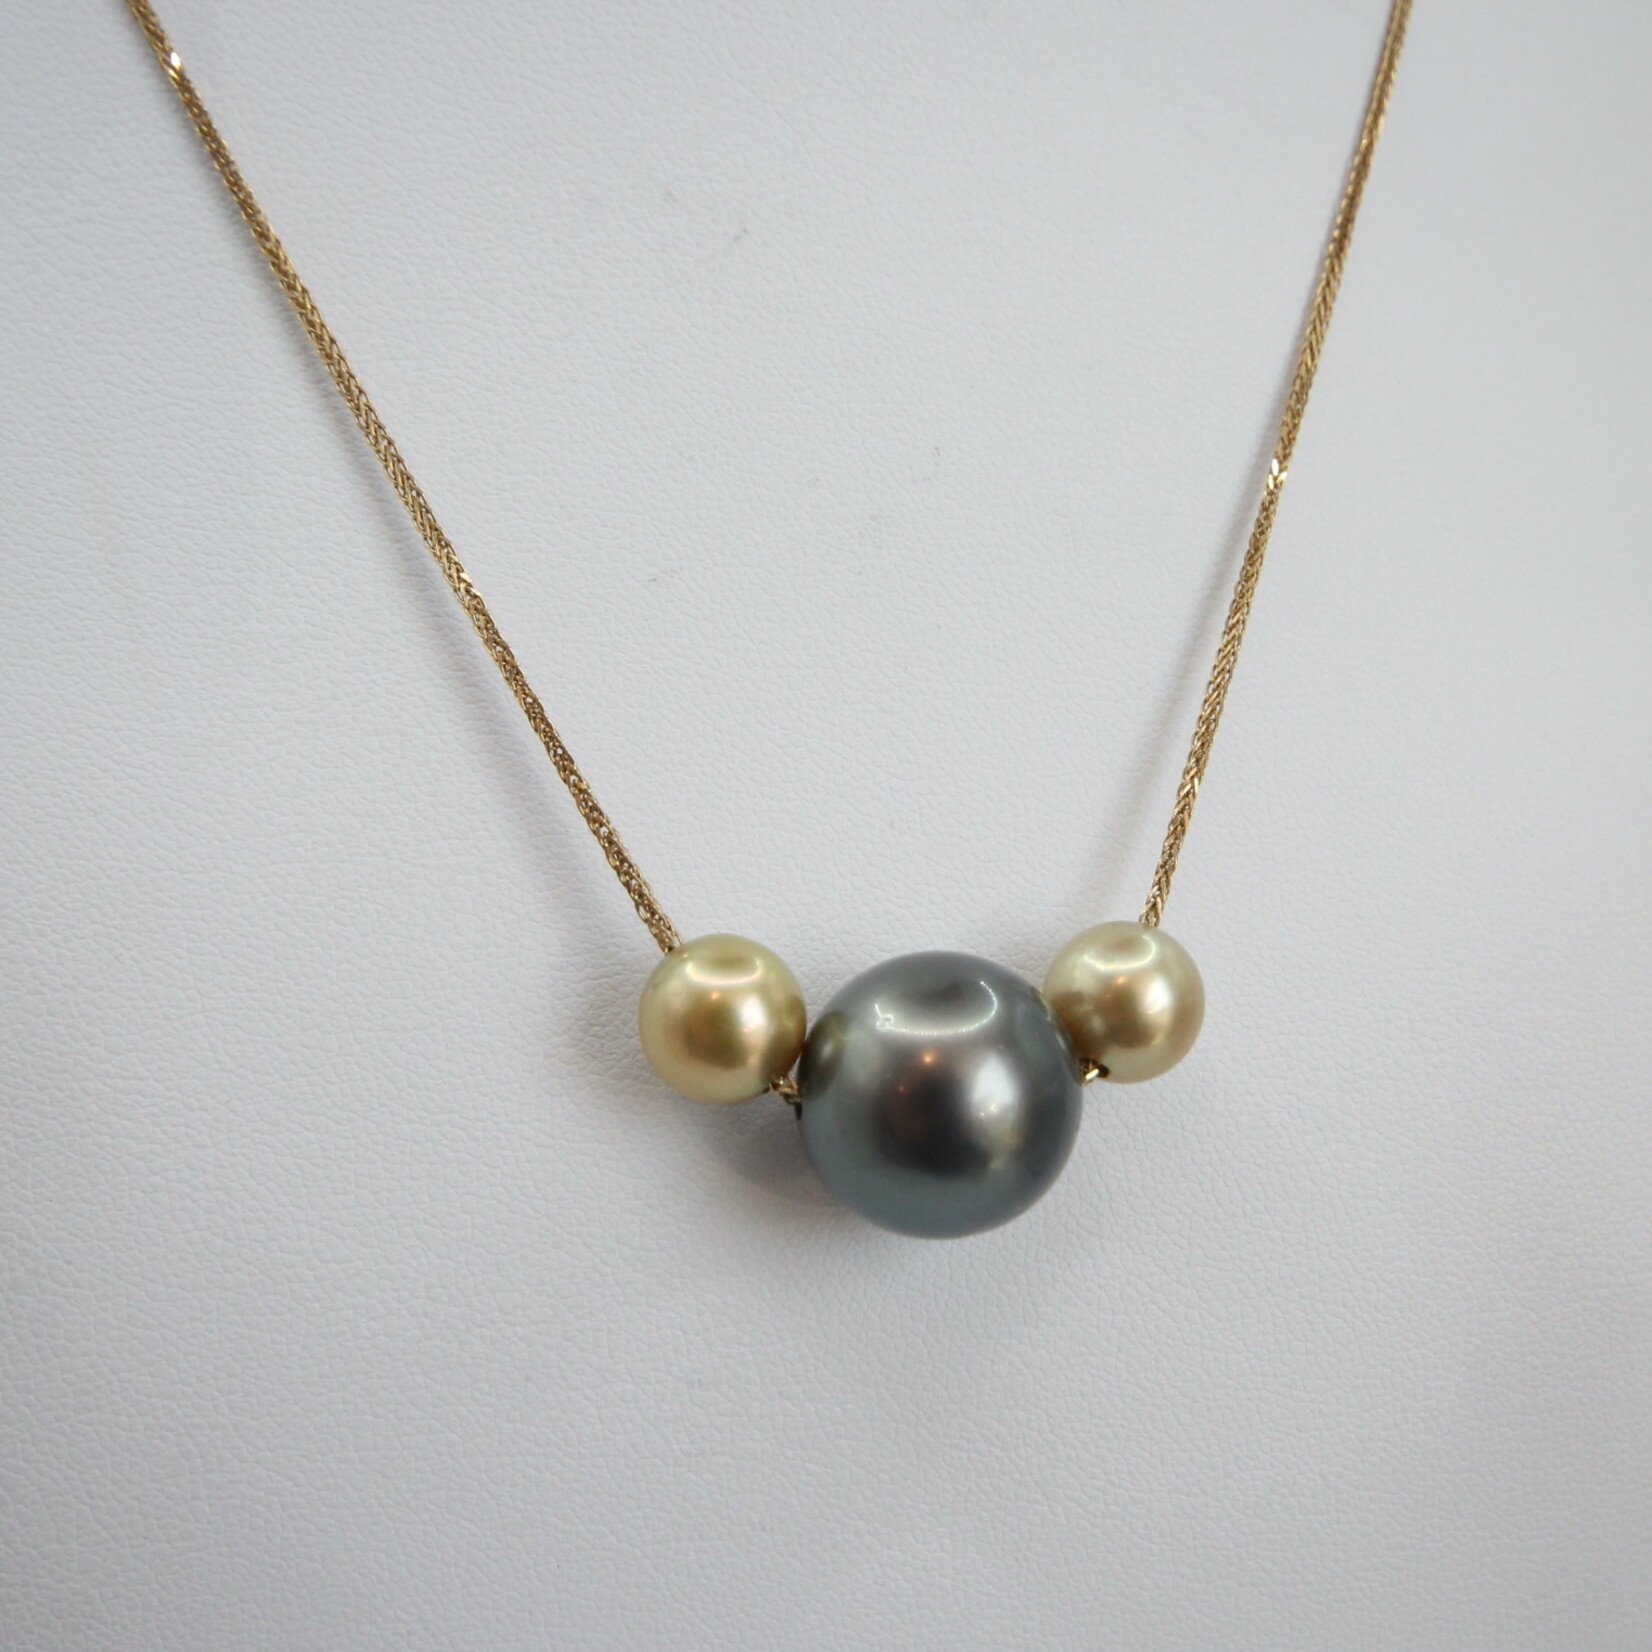 Large Round Tahitian & Yellow South Sea Pearls on Gold Chain